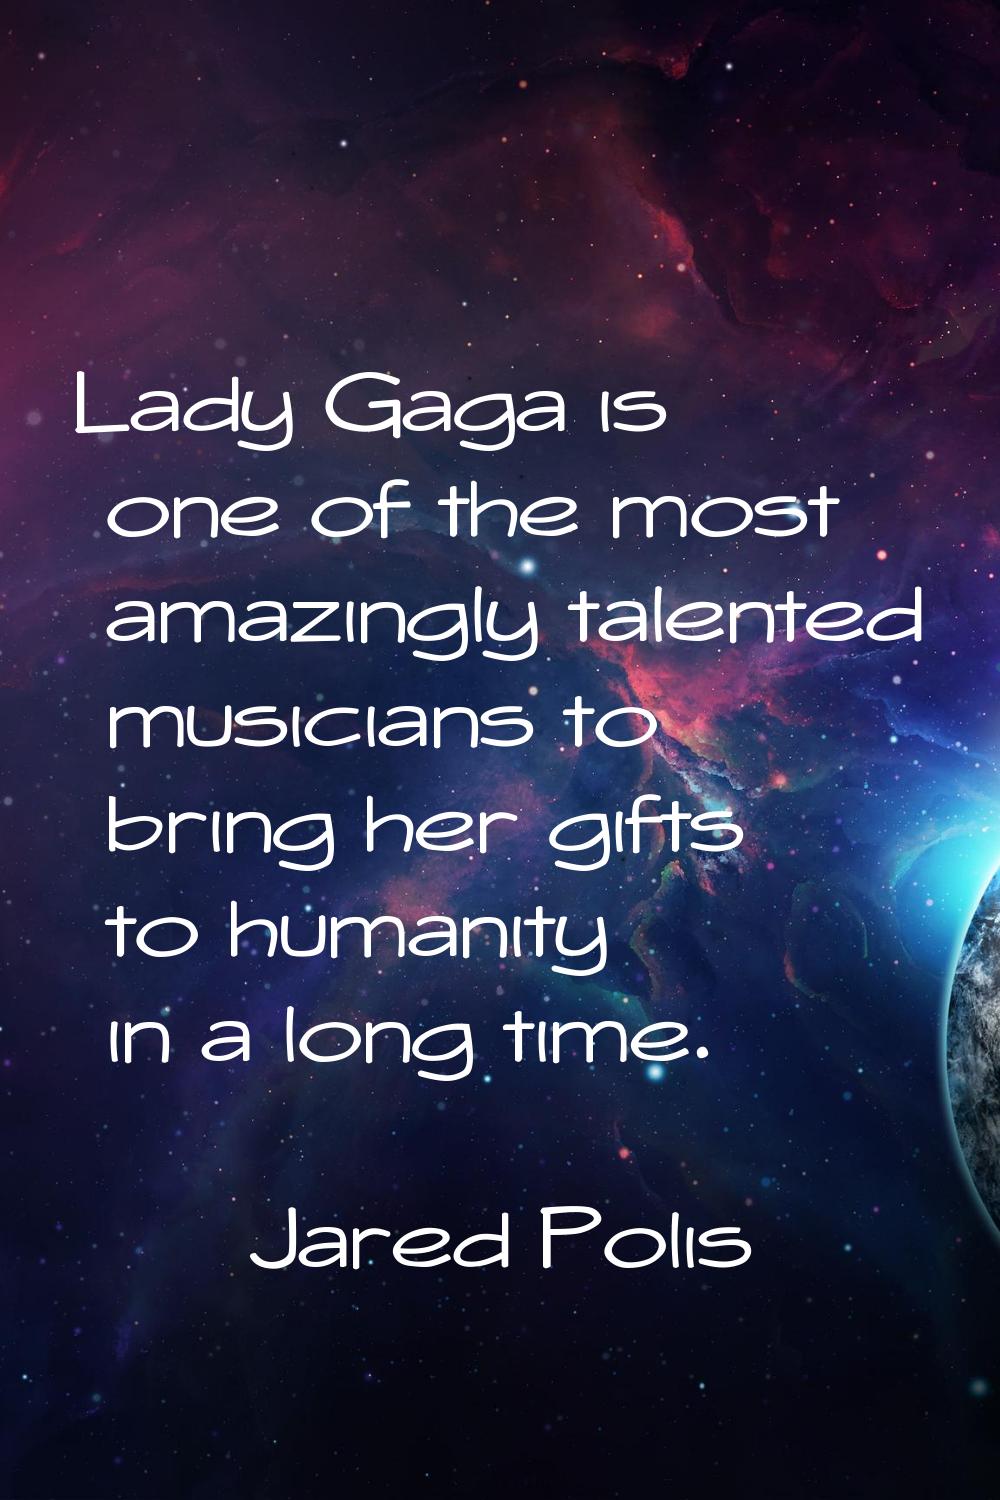 Lady Gaga is one of the most amazingly talented musicians to bring her gifts to humanity in a long 